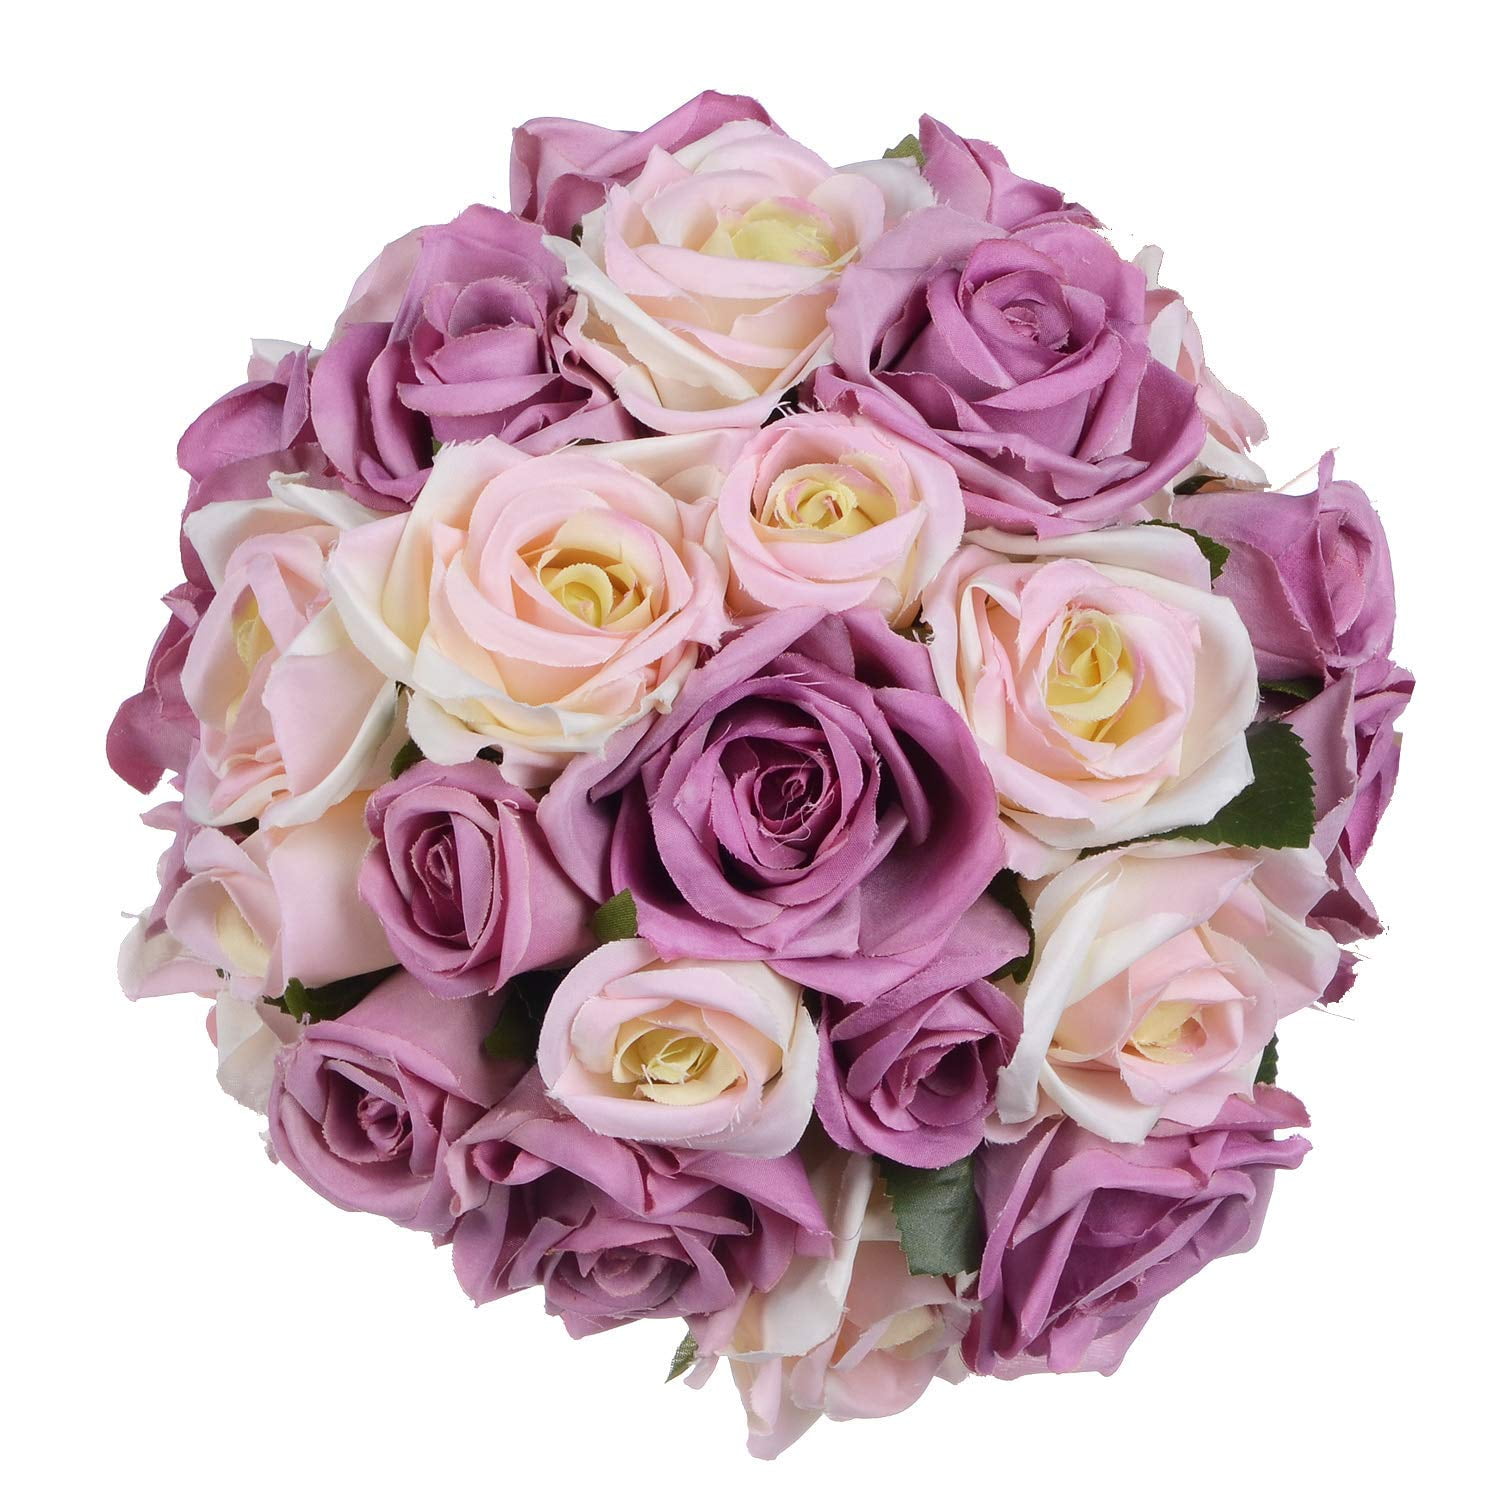 Artificial Latex rose Flowers for Wedding Two Heads Real Touch Flower rose  Home decorations Wedding Party bouquet supplies - Price history & Review, AliExpress Seller - JAROWN Official Store